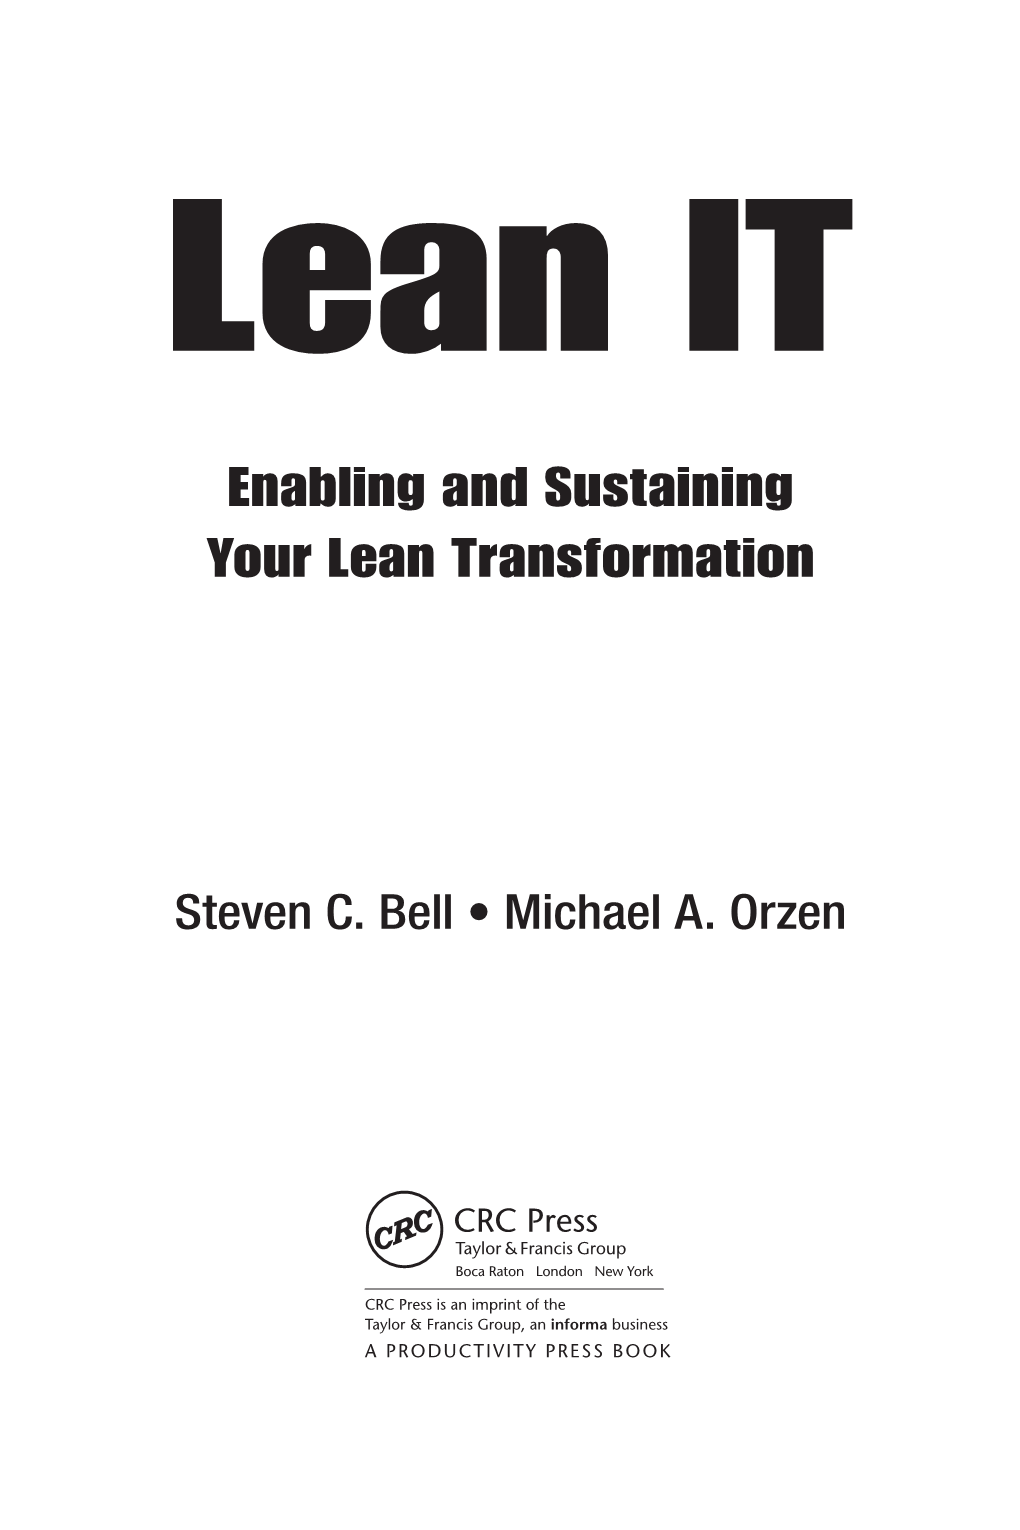 Enabling and Sustaining Your Lean Transformation